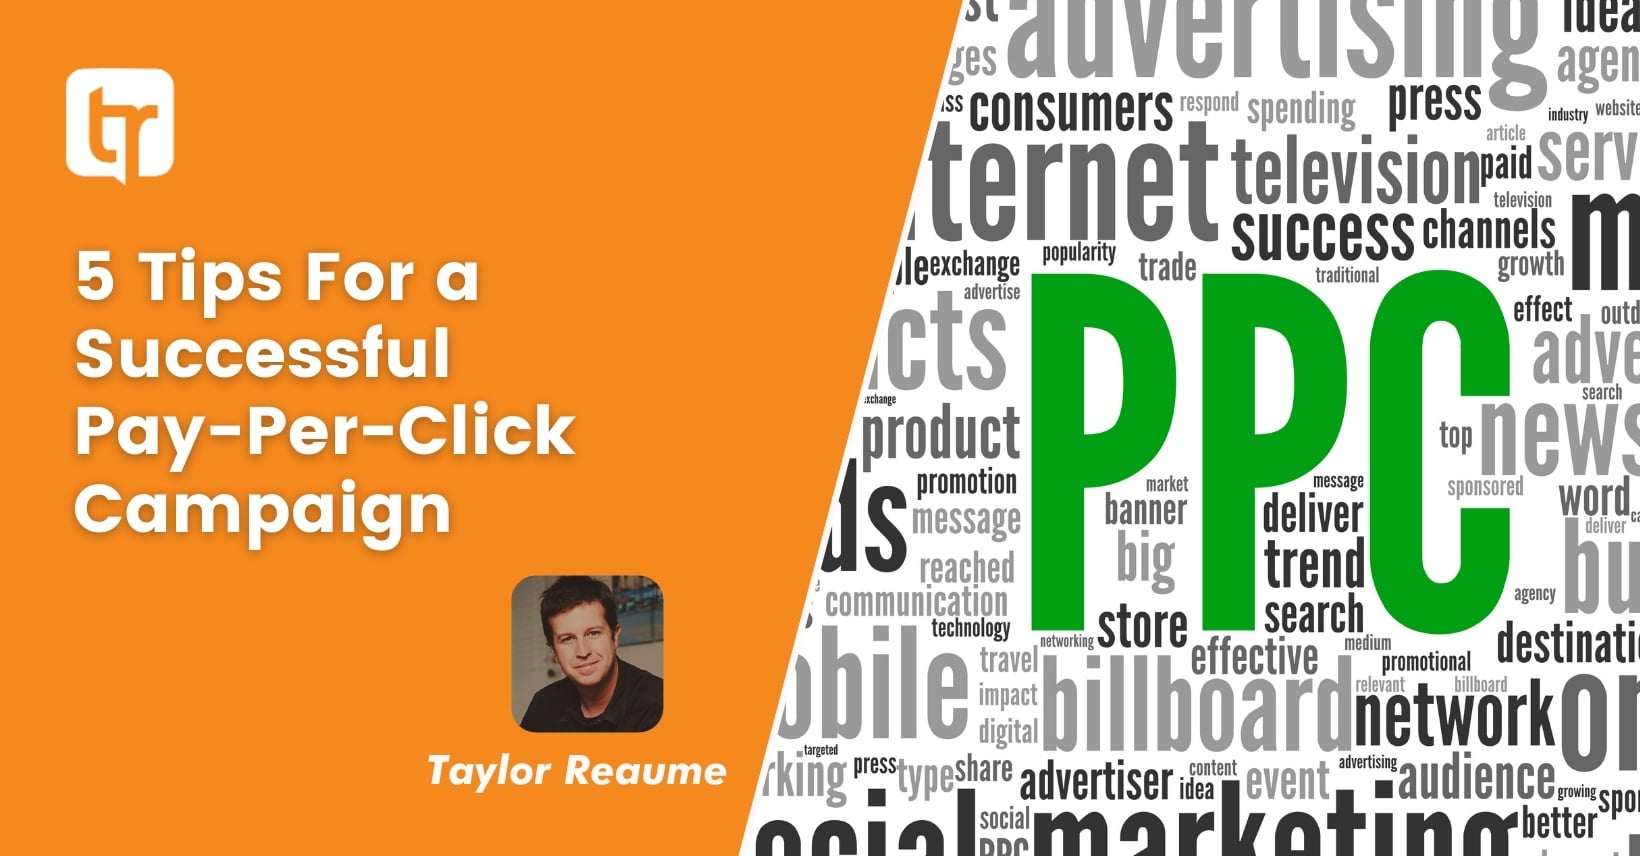 5 Tips For a Successful Pay-Per-Click Campaign